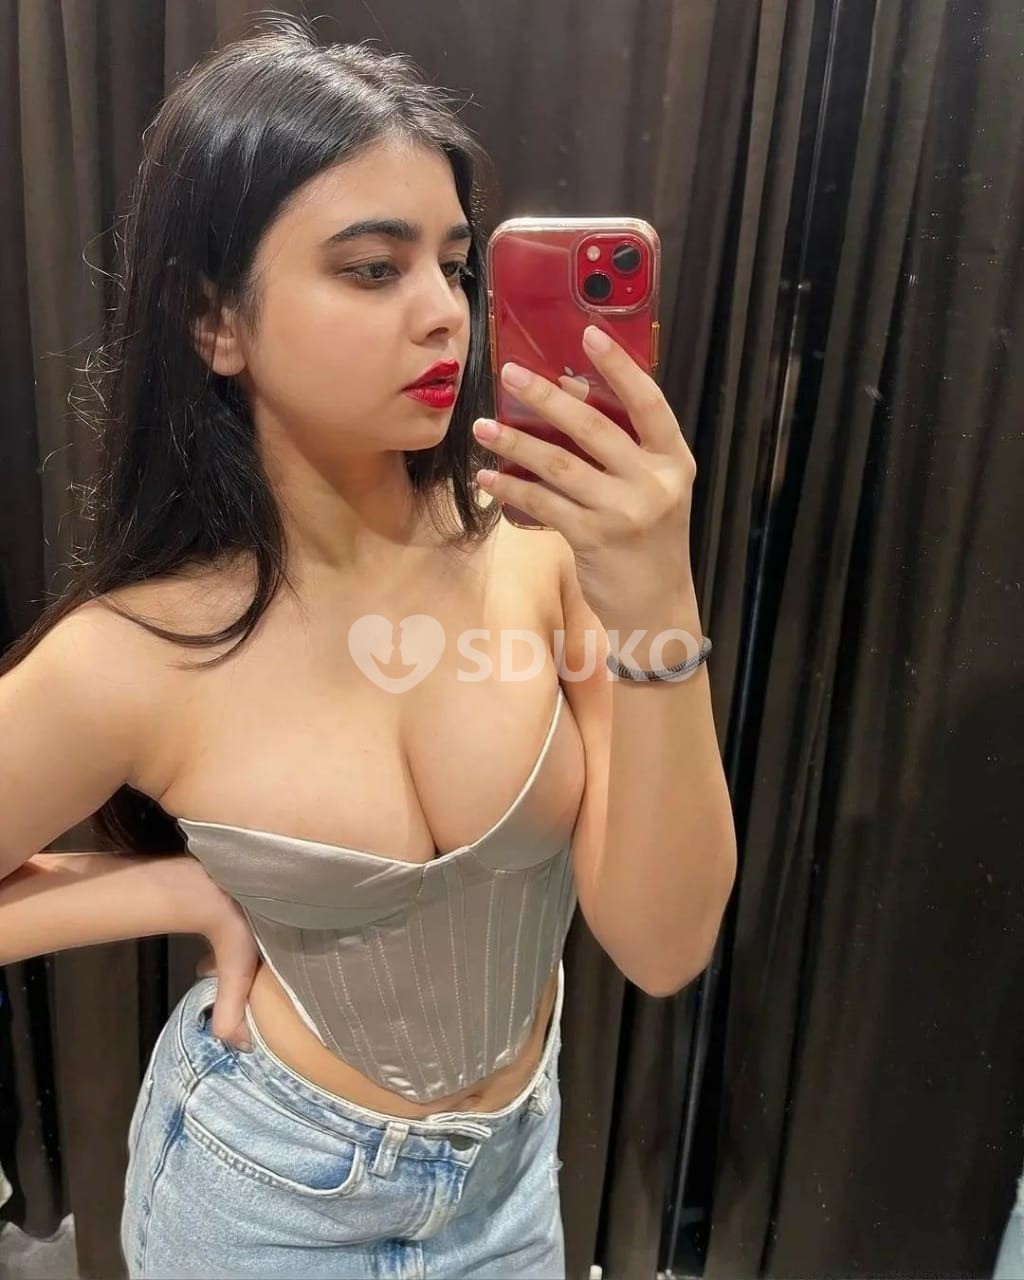 BEGUMPET VIP TODAY LOW;' PRICE ESCORT 🥰SERVICE 100% SAFE AND SECURE ANYTIME CALL ME 24 X 7 SERVICE AVAILABLE 100% SAF